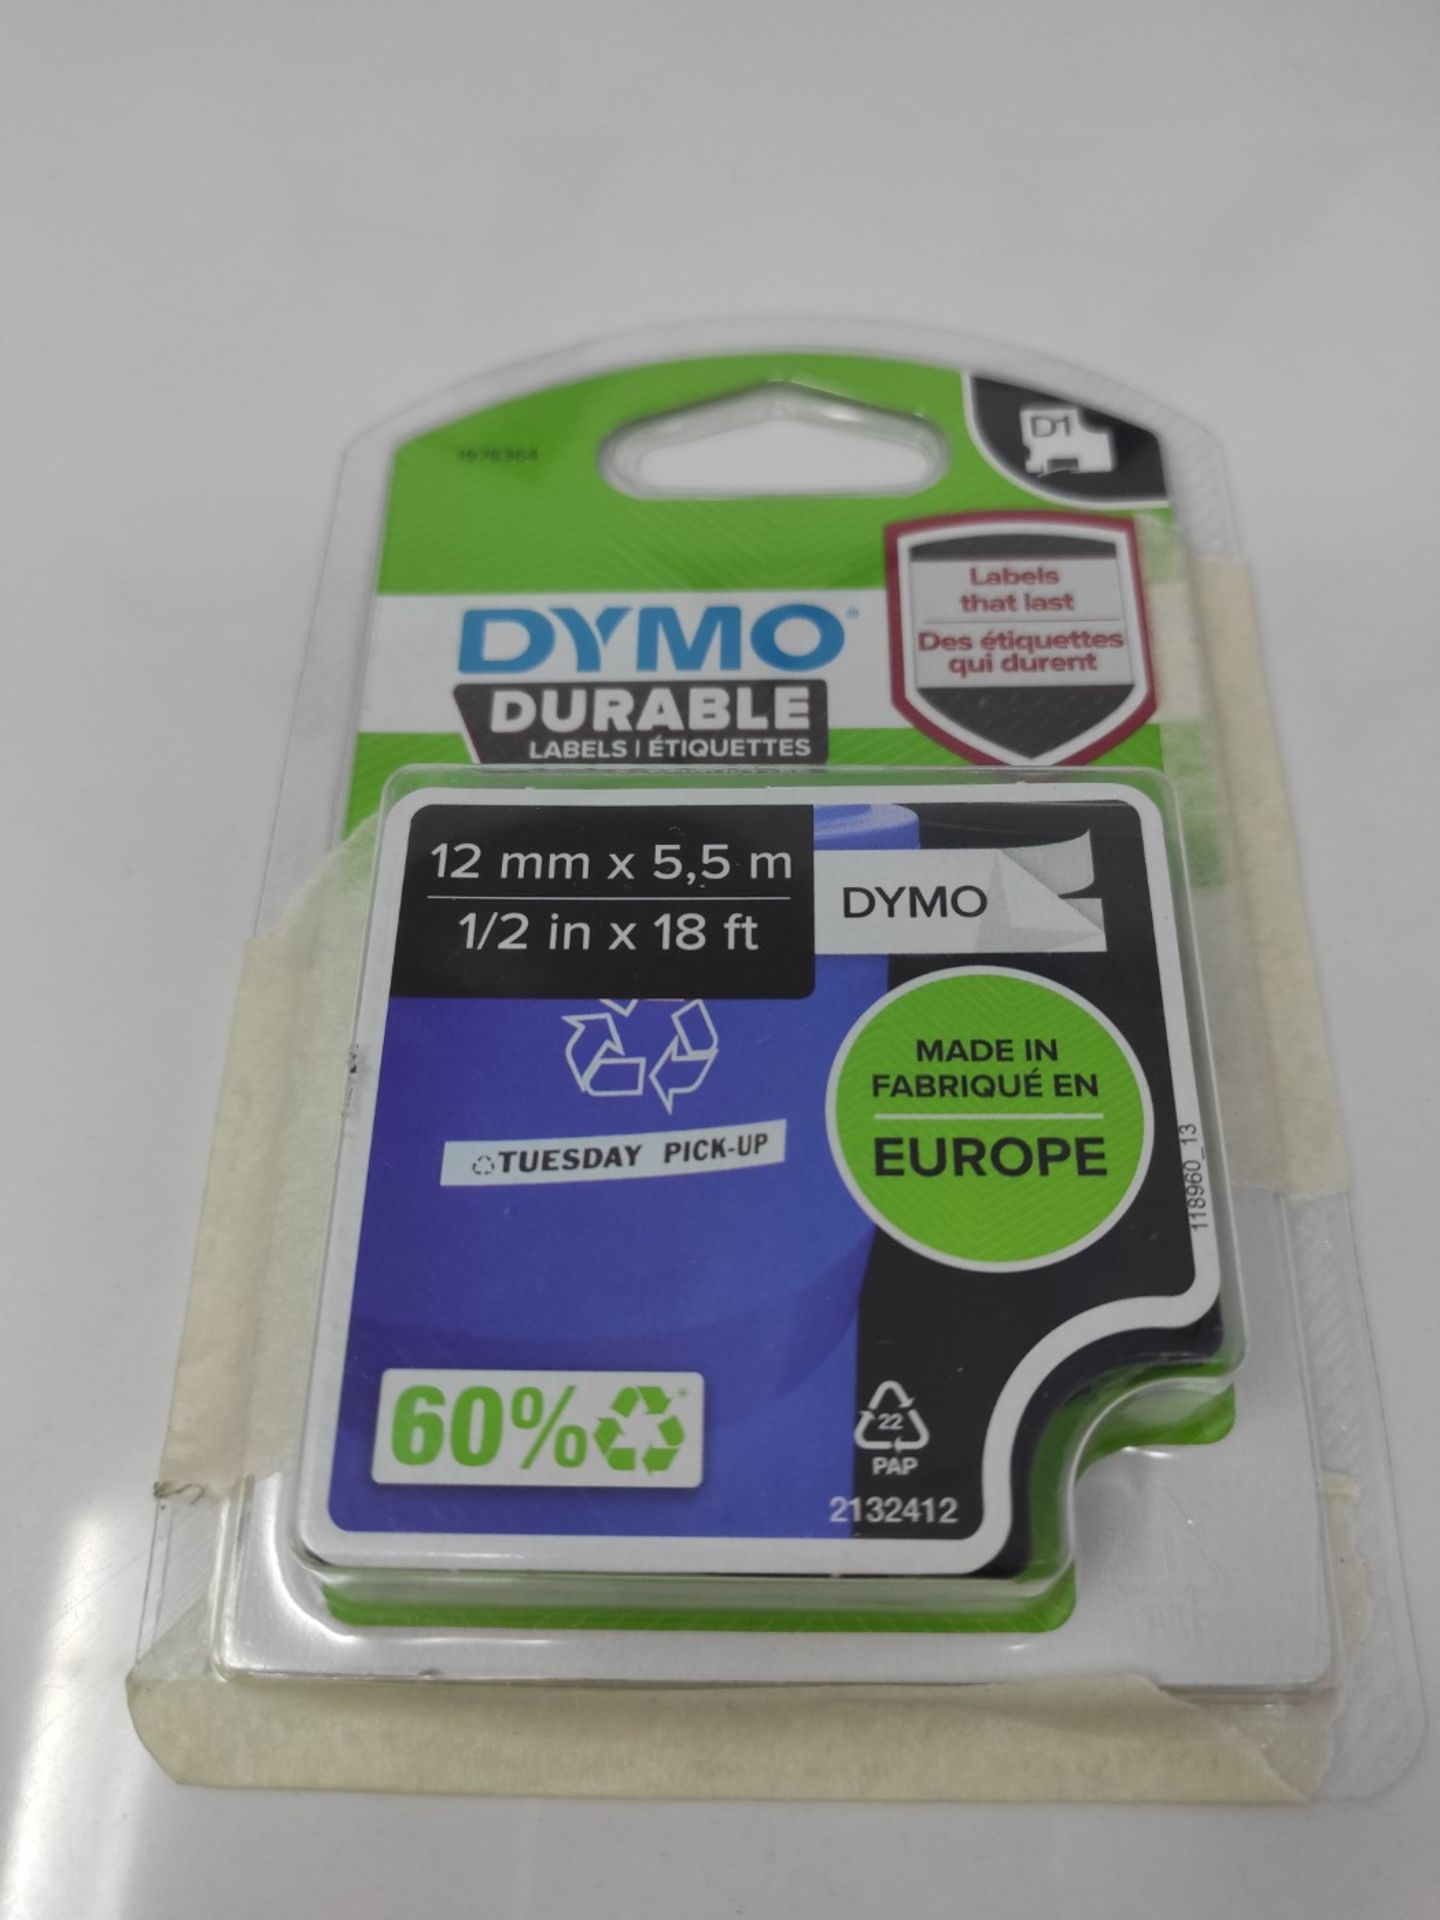 DYMO Authentic D1 Durable Labels | Black Print on White Tape | 12 mm x 5.5 m | High-Pe - Image 2 of 2